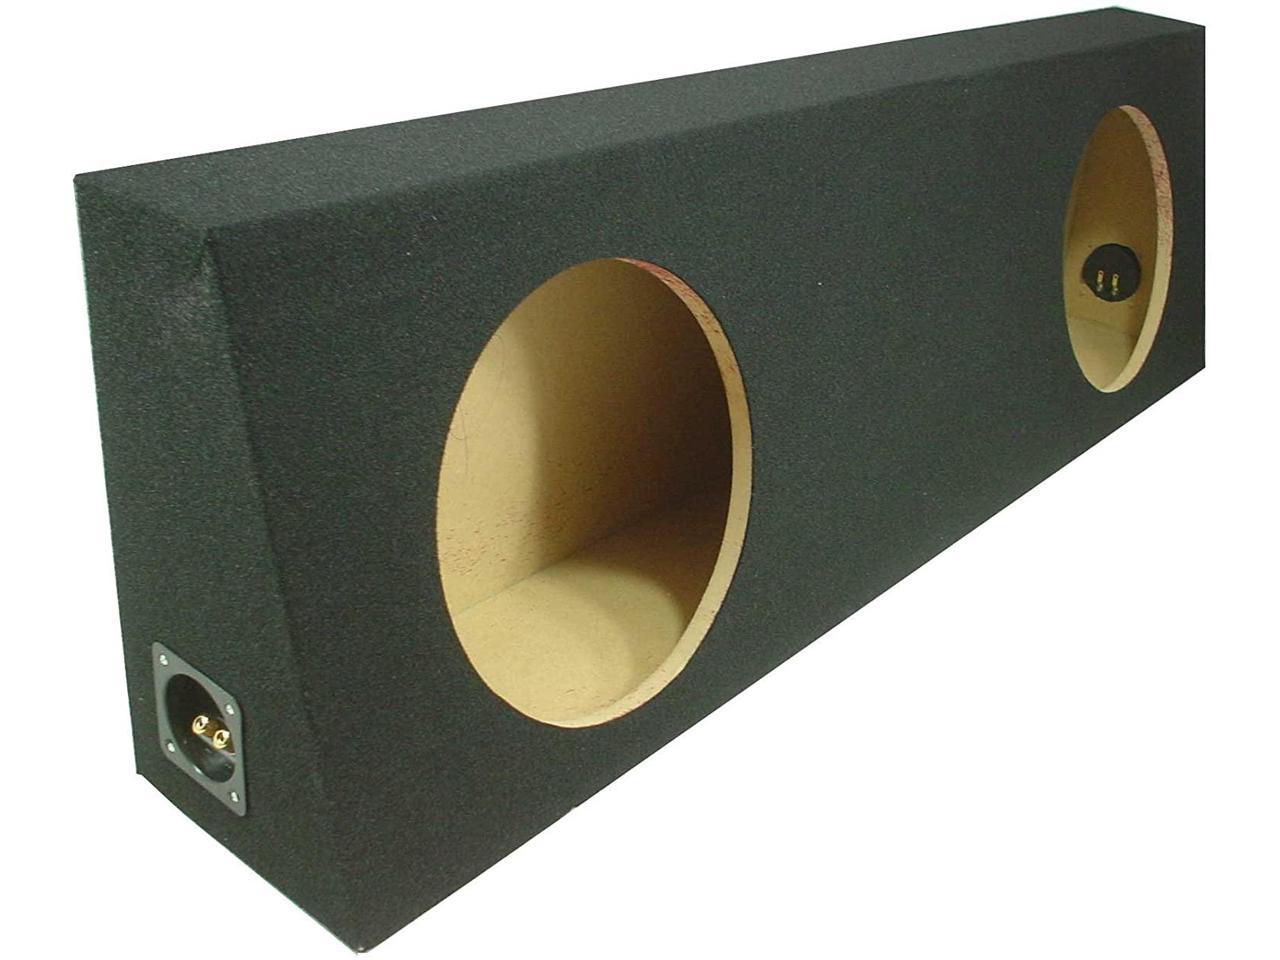 Car Audio Single 10 Slim Ported Vented Truck-Style Subwoofer Enclosure Bass Box 